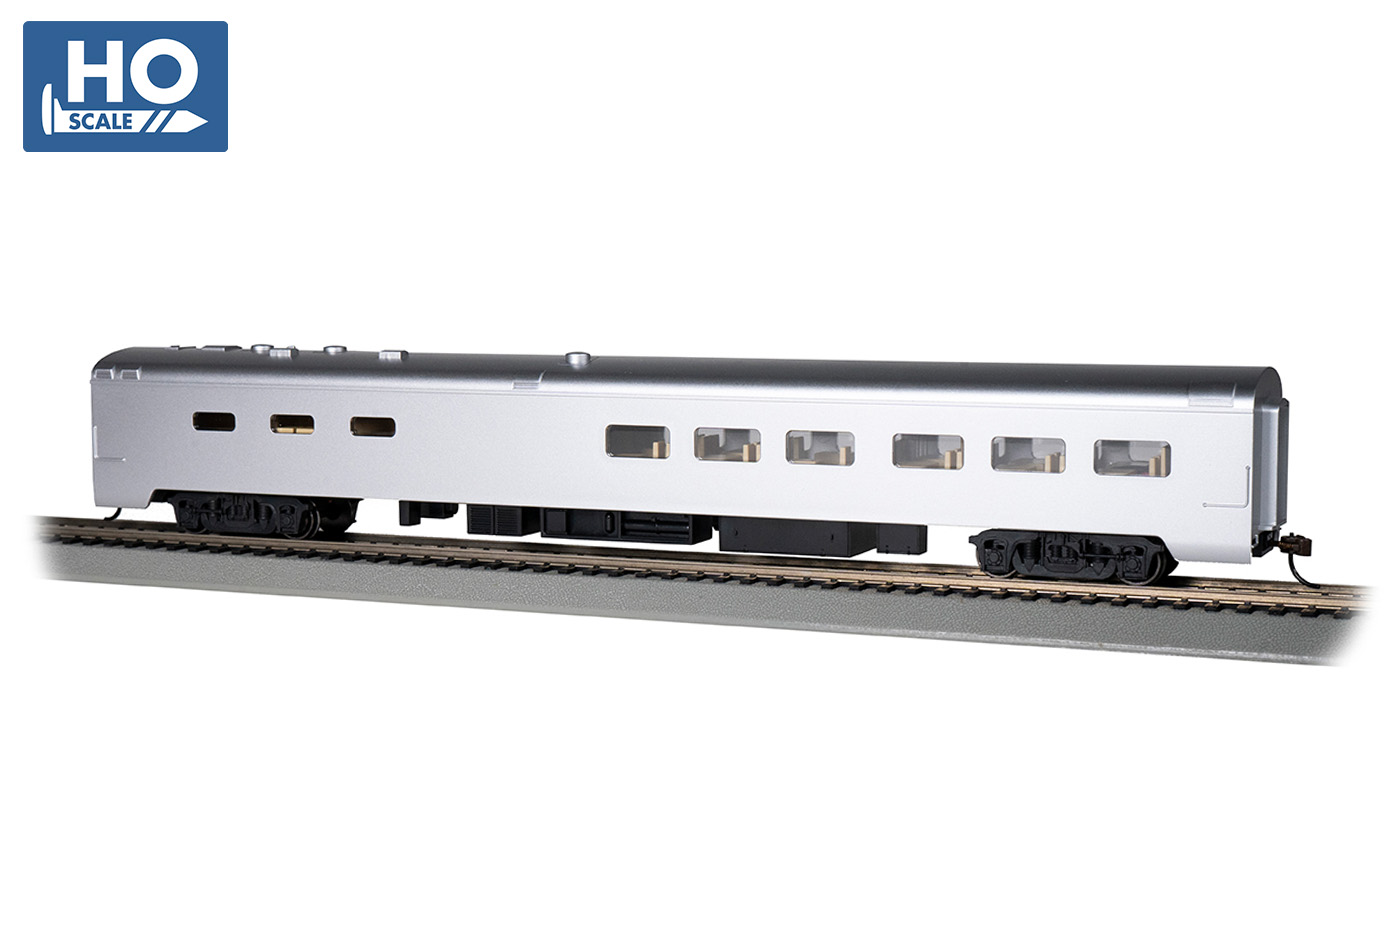 Fleet of Modernism HO Scale 85 Smooth-Side Coach Car with Lighted Interior Bachmann Trains PRR #4251 